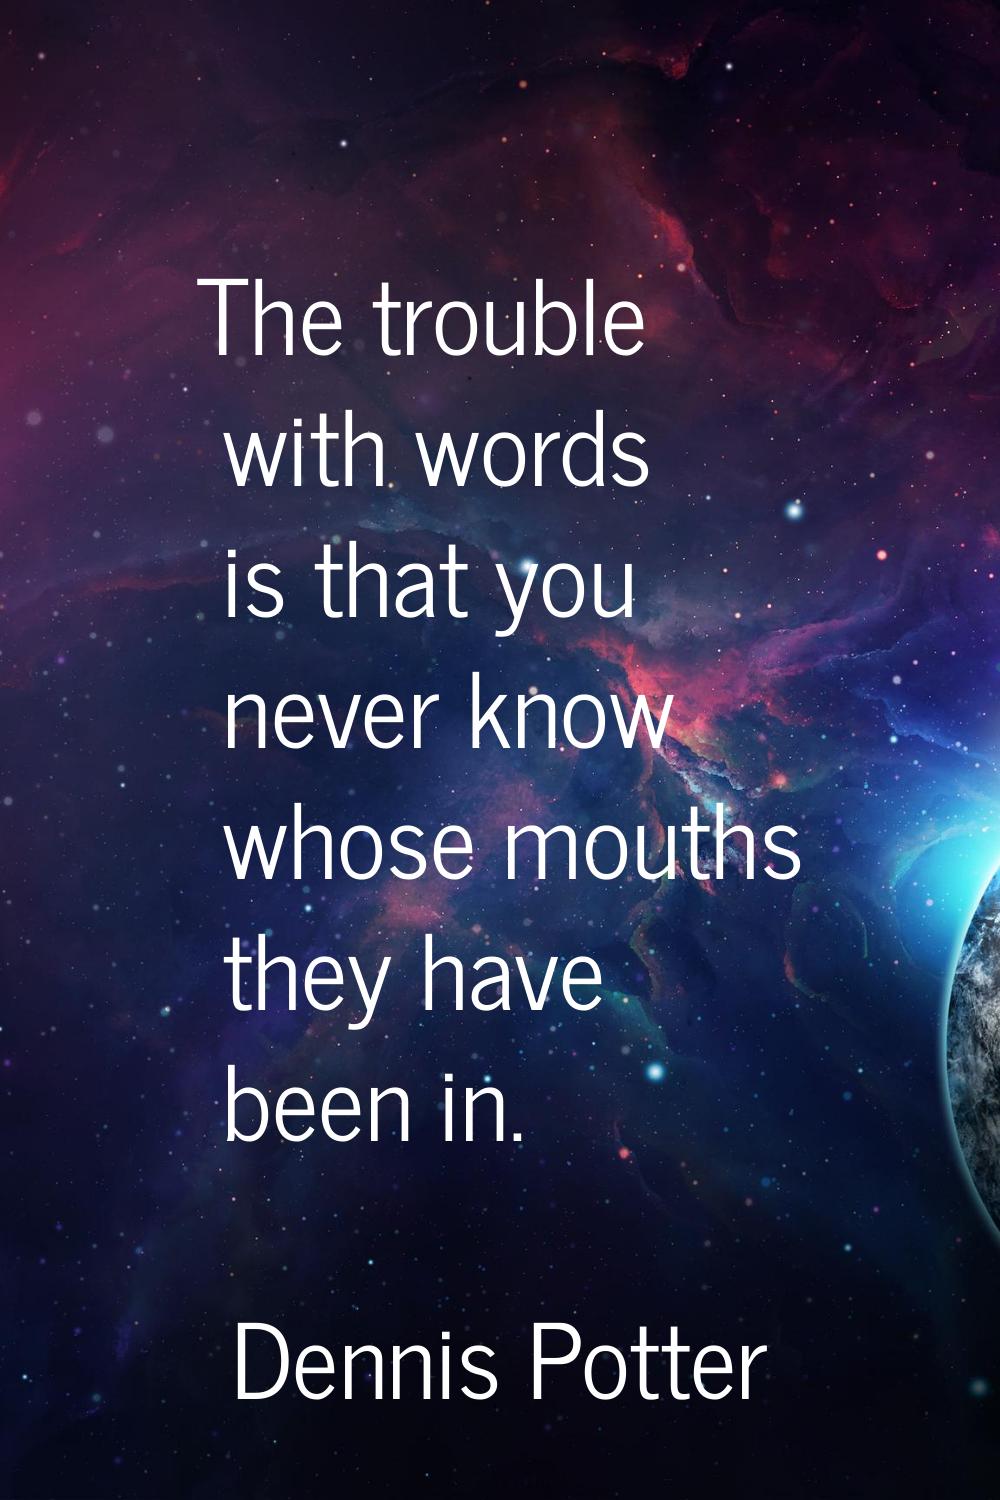 The trouble with words is that you never know whose mouths they have been in.